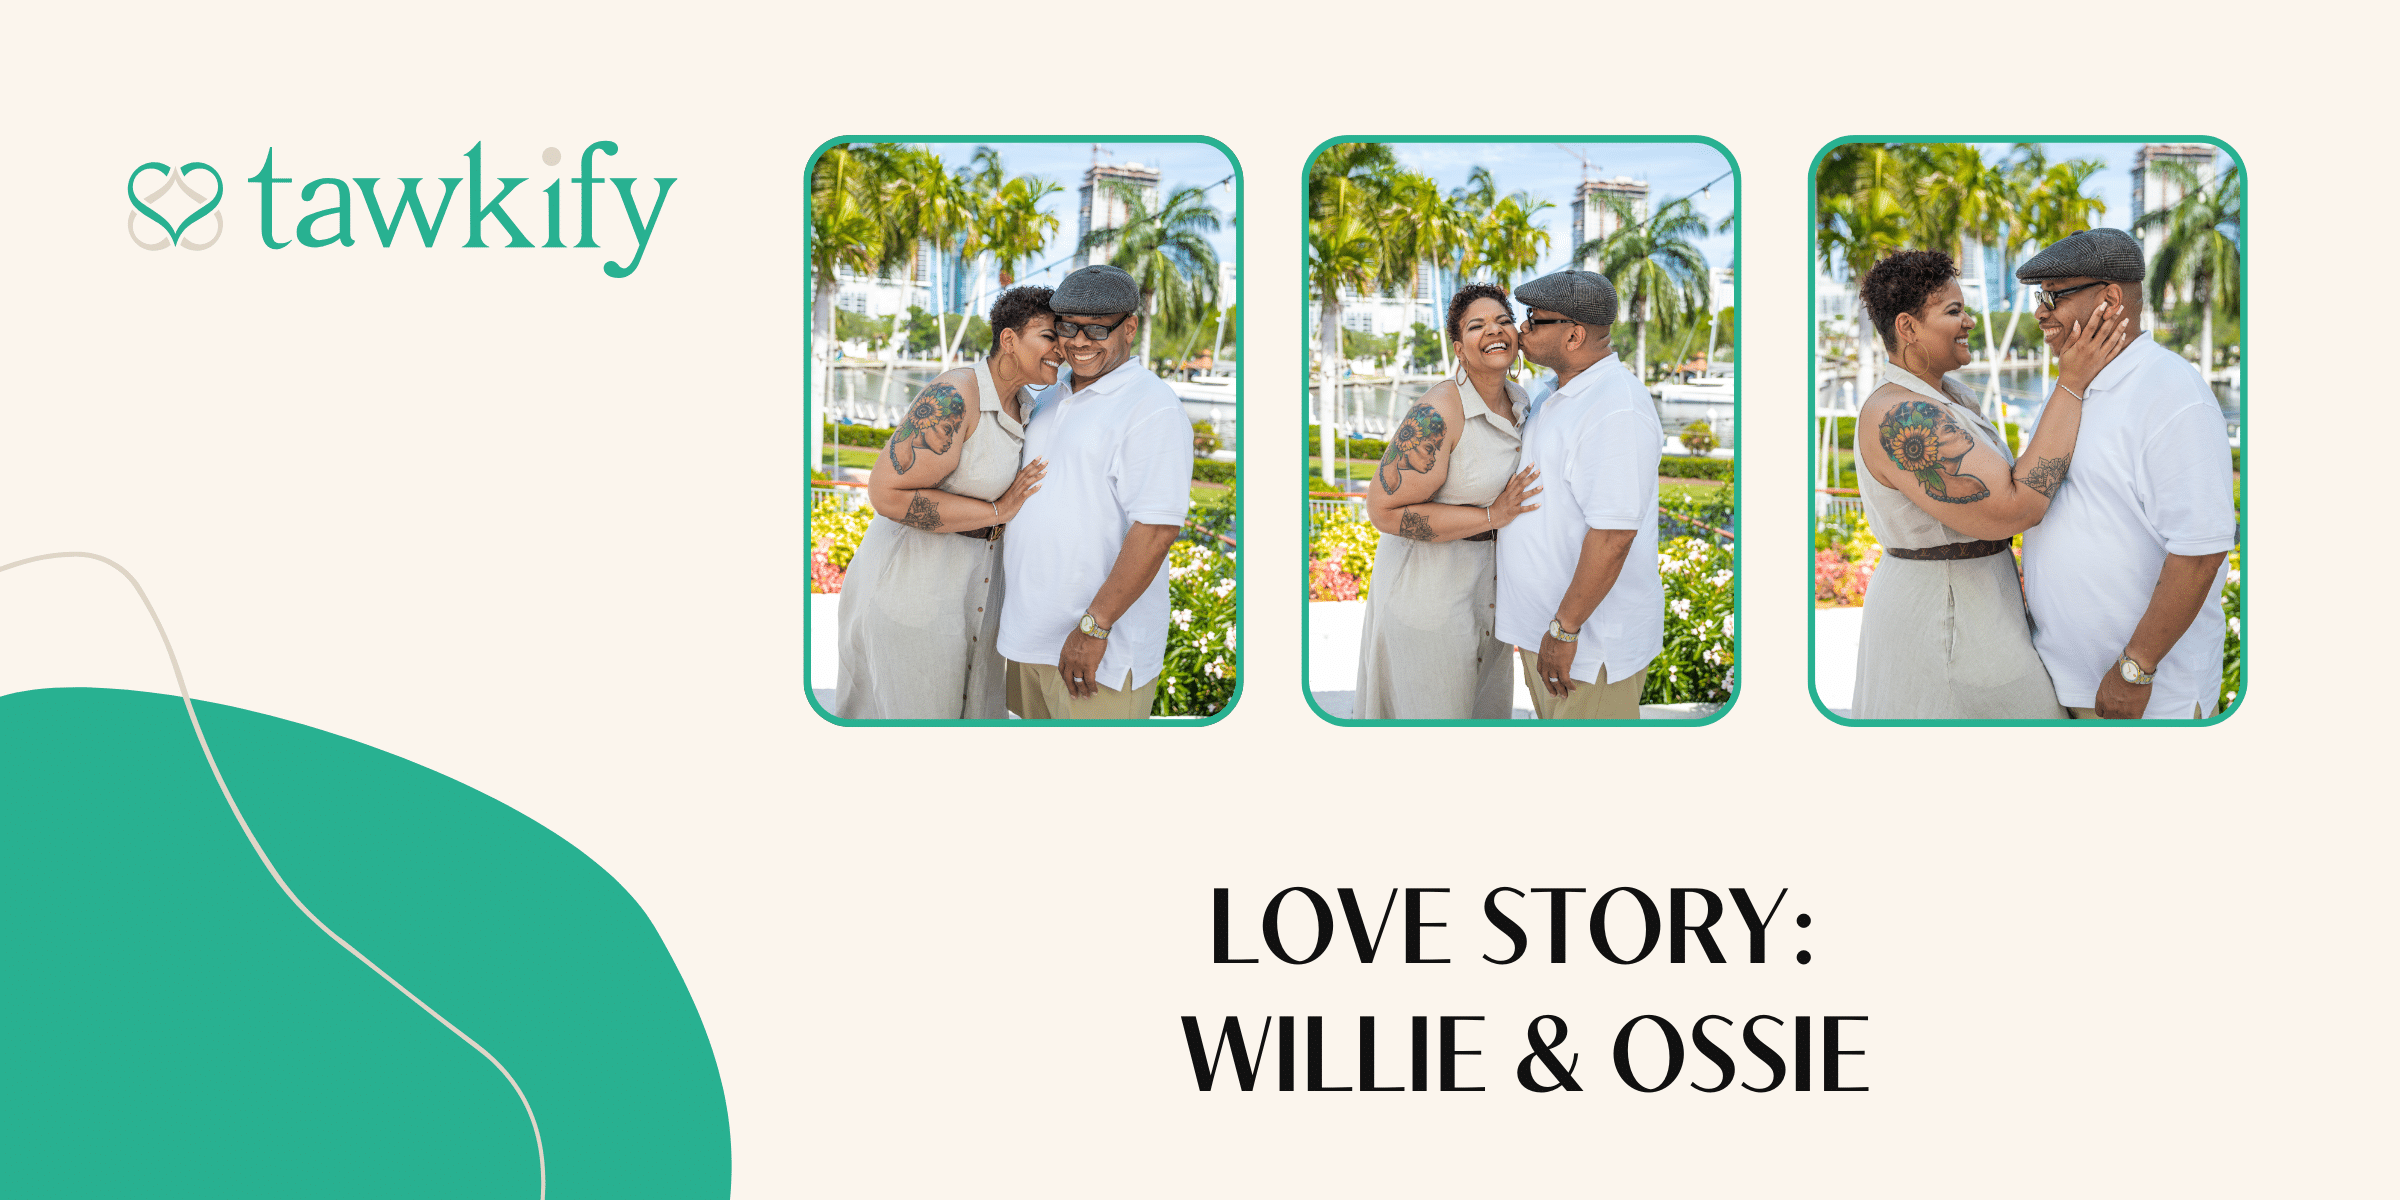 Interested in learning more about how Tawkify helps singles find long-lasting love? Read this Tawkify testimonial about a couple’s success story.